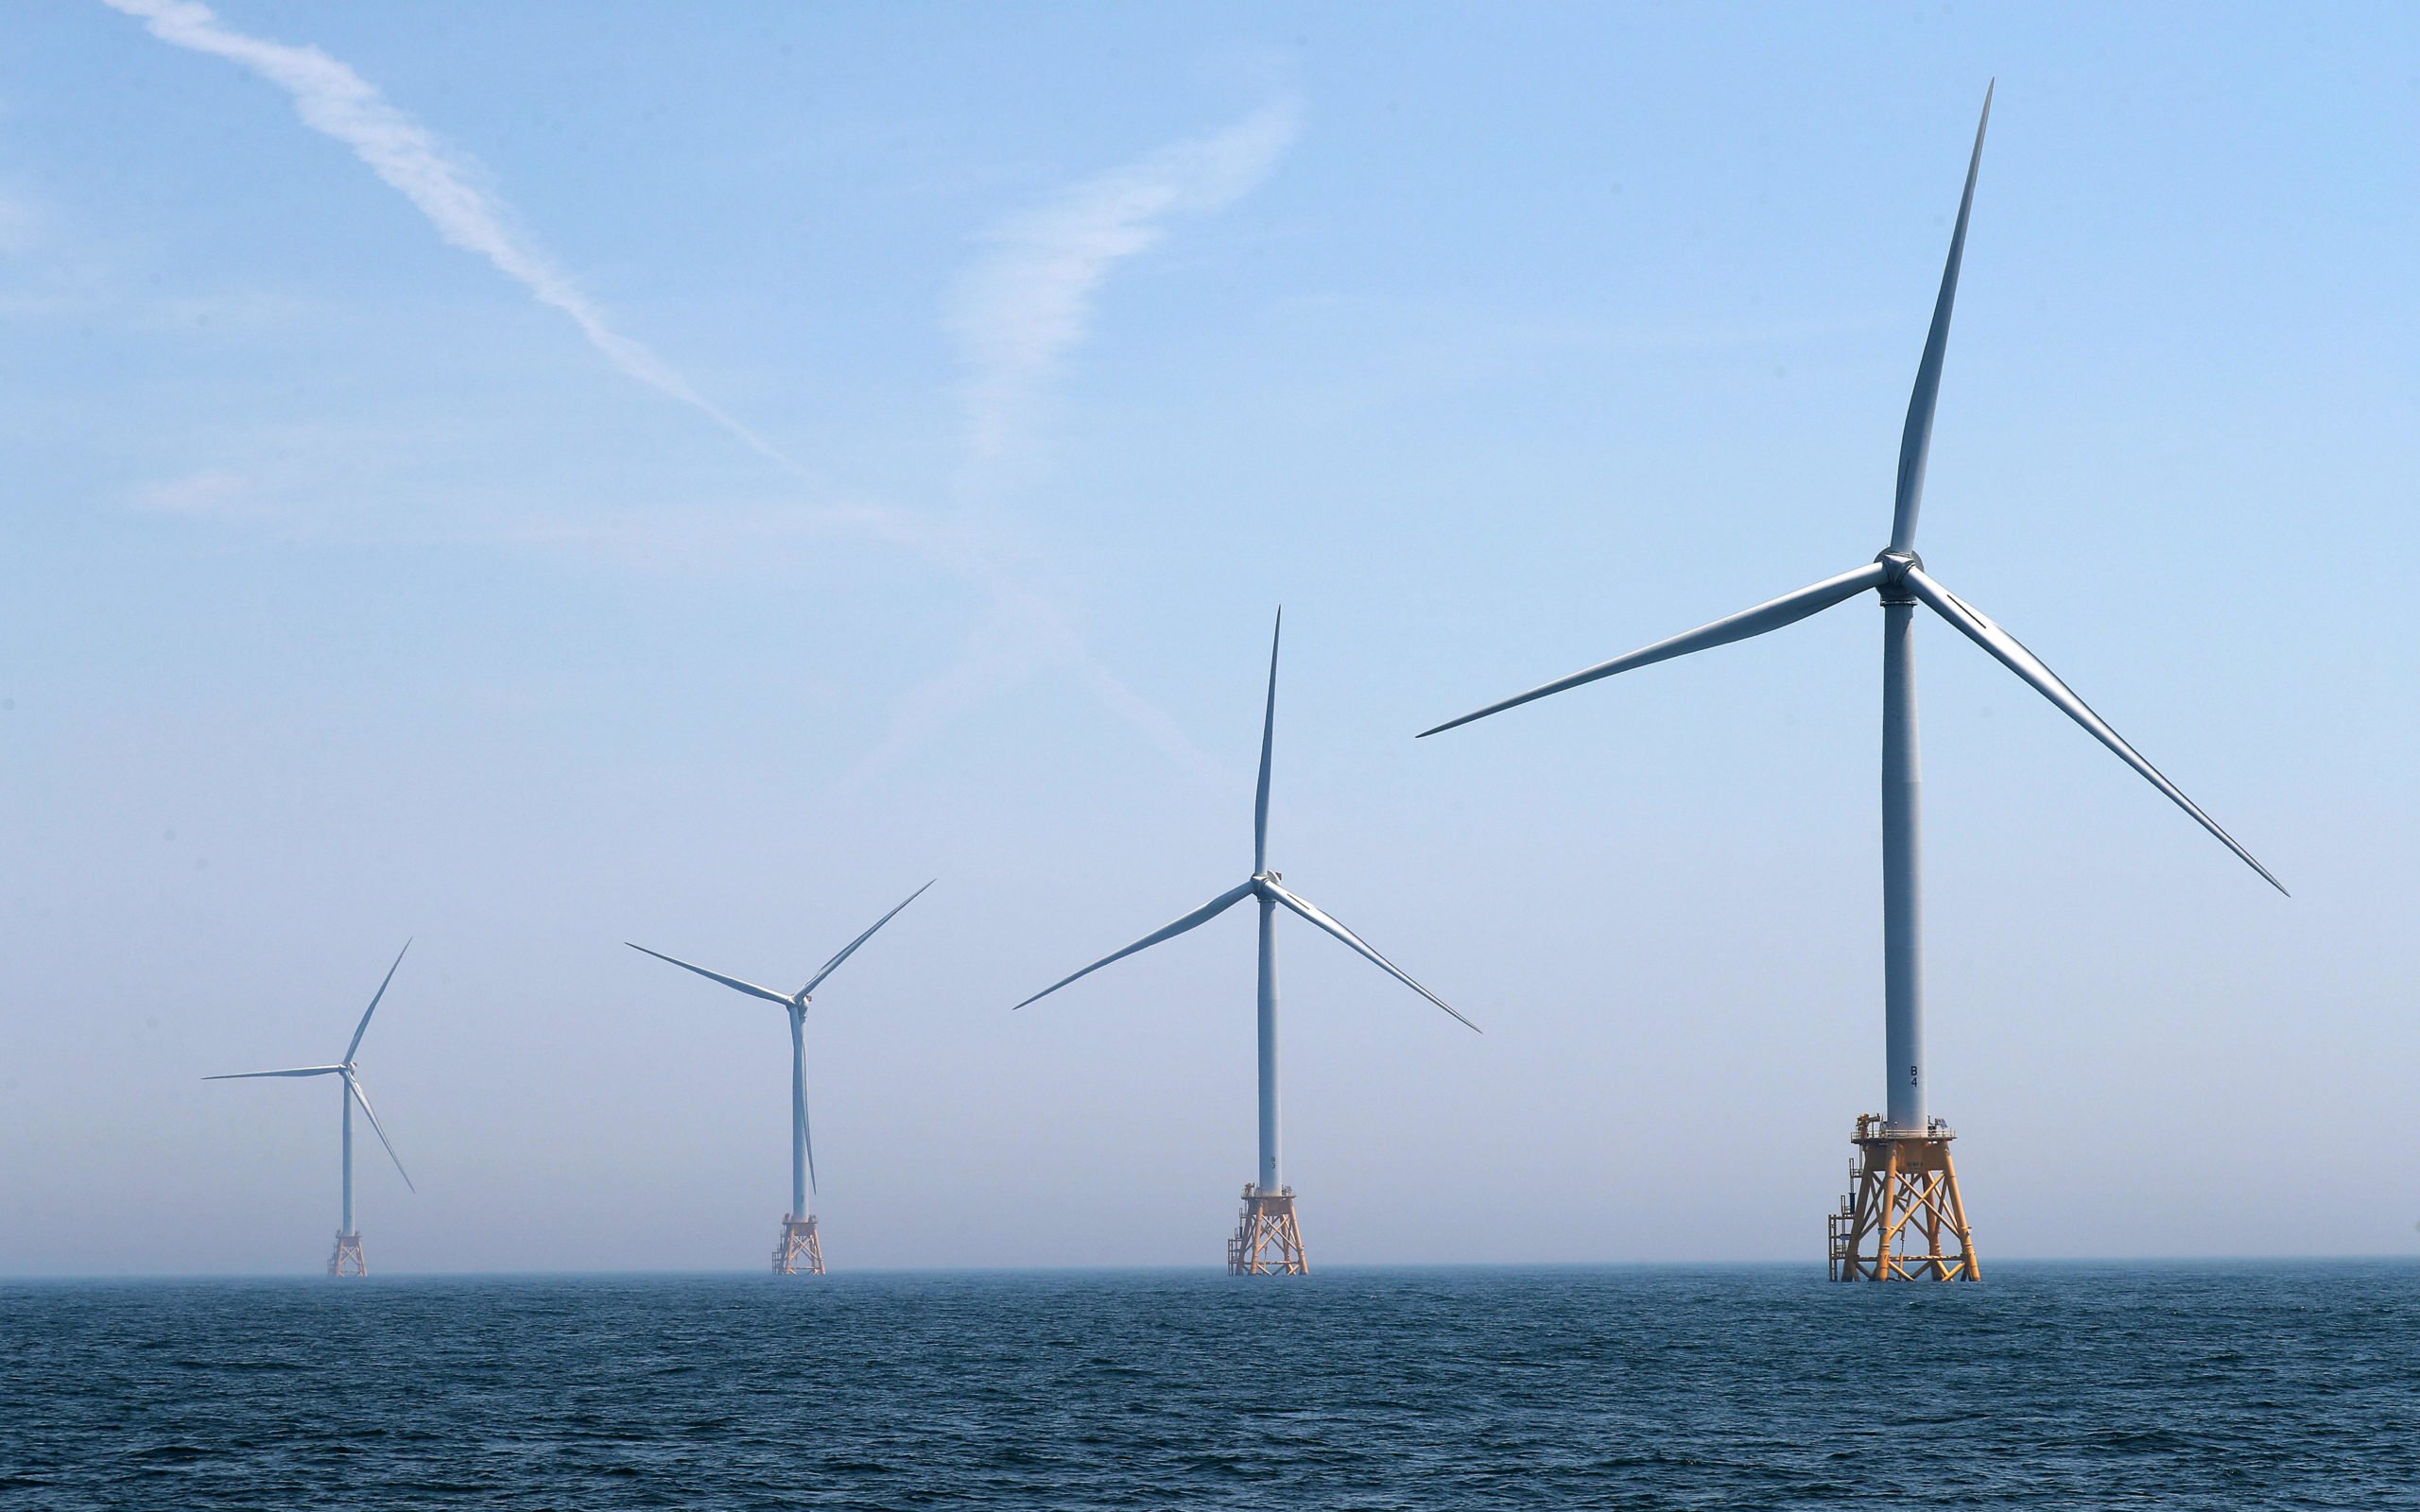 Construction starts at America’s first major offshore wind farm